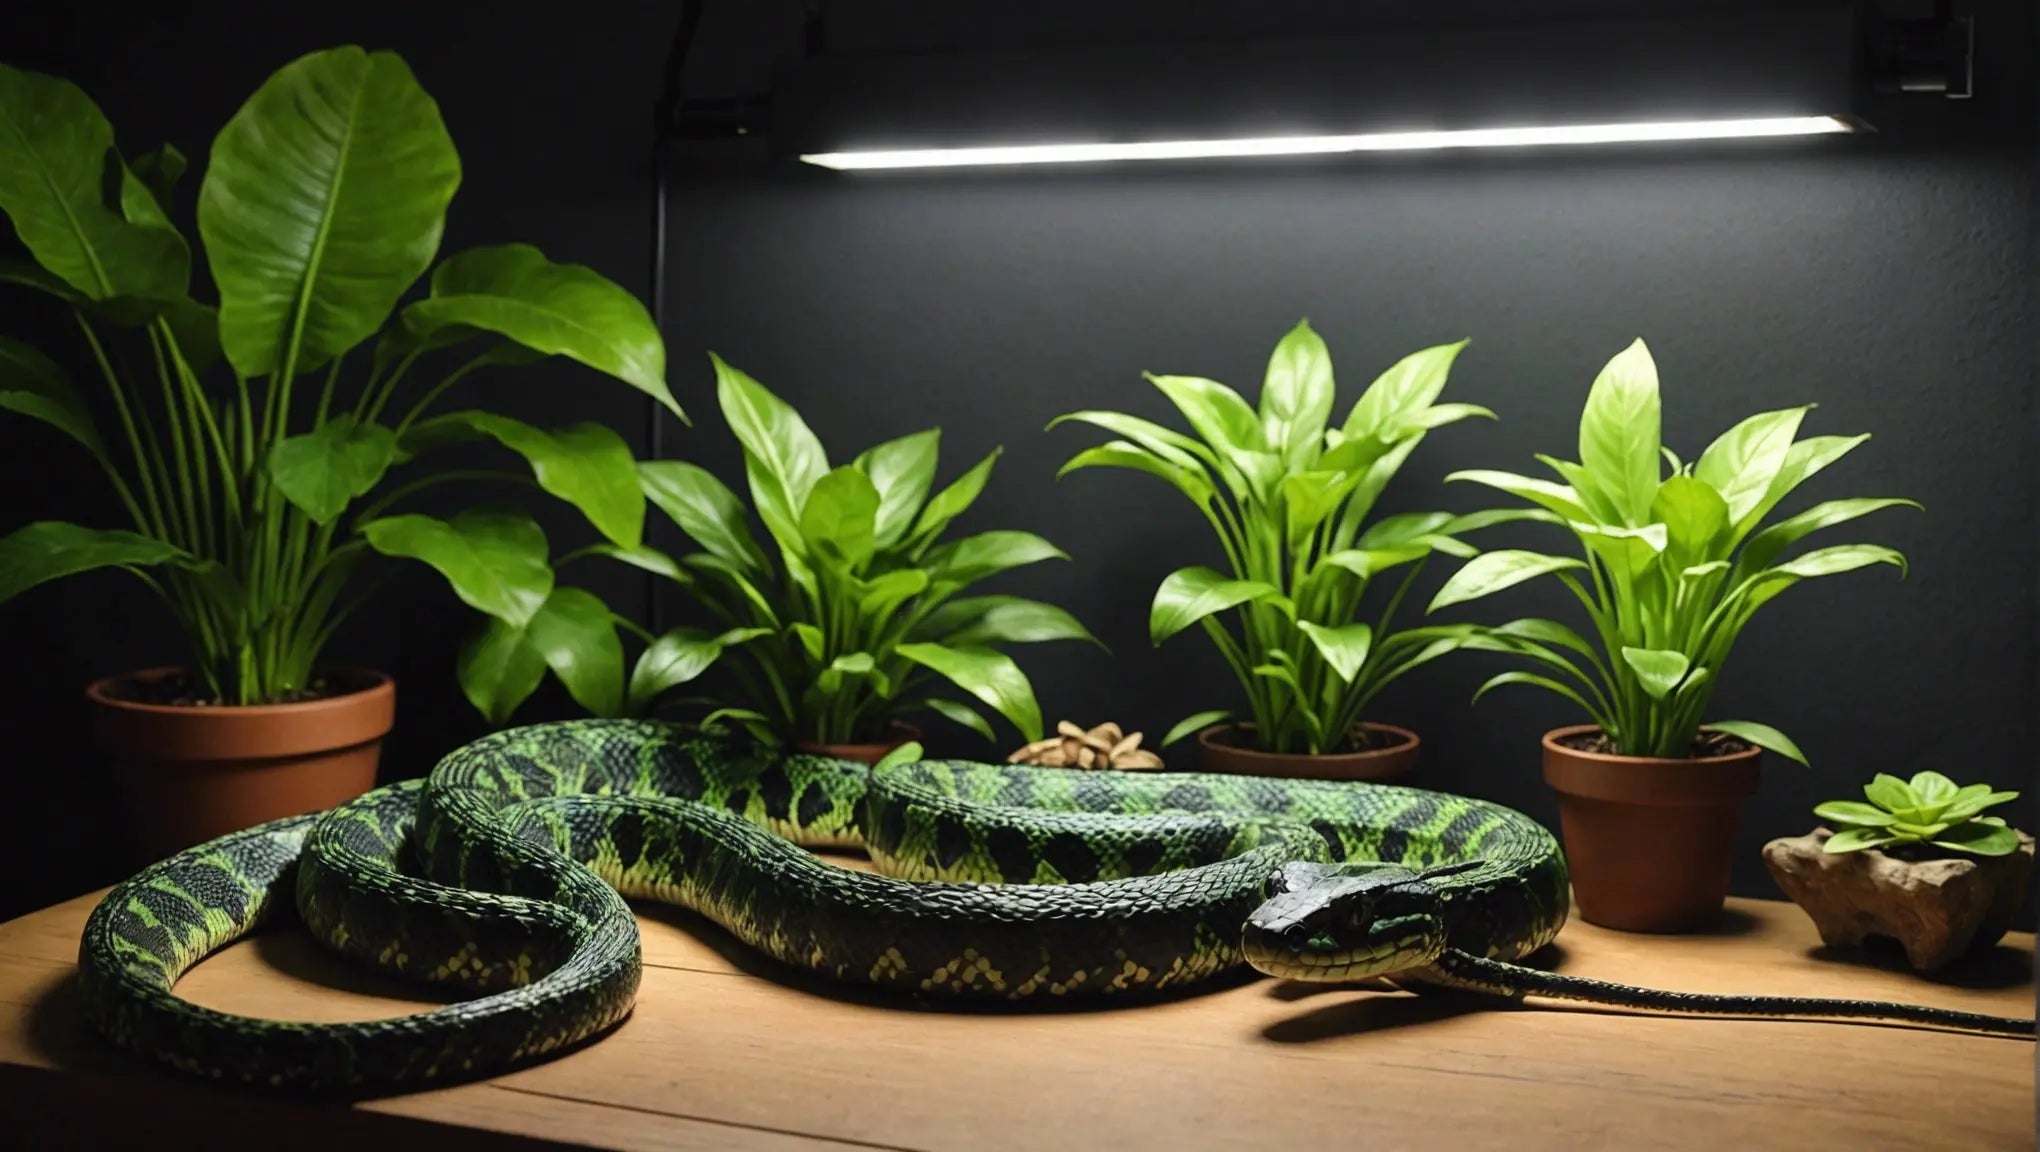 The Benefits of Using an LED Snake Light for Your Reptile